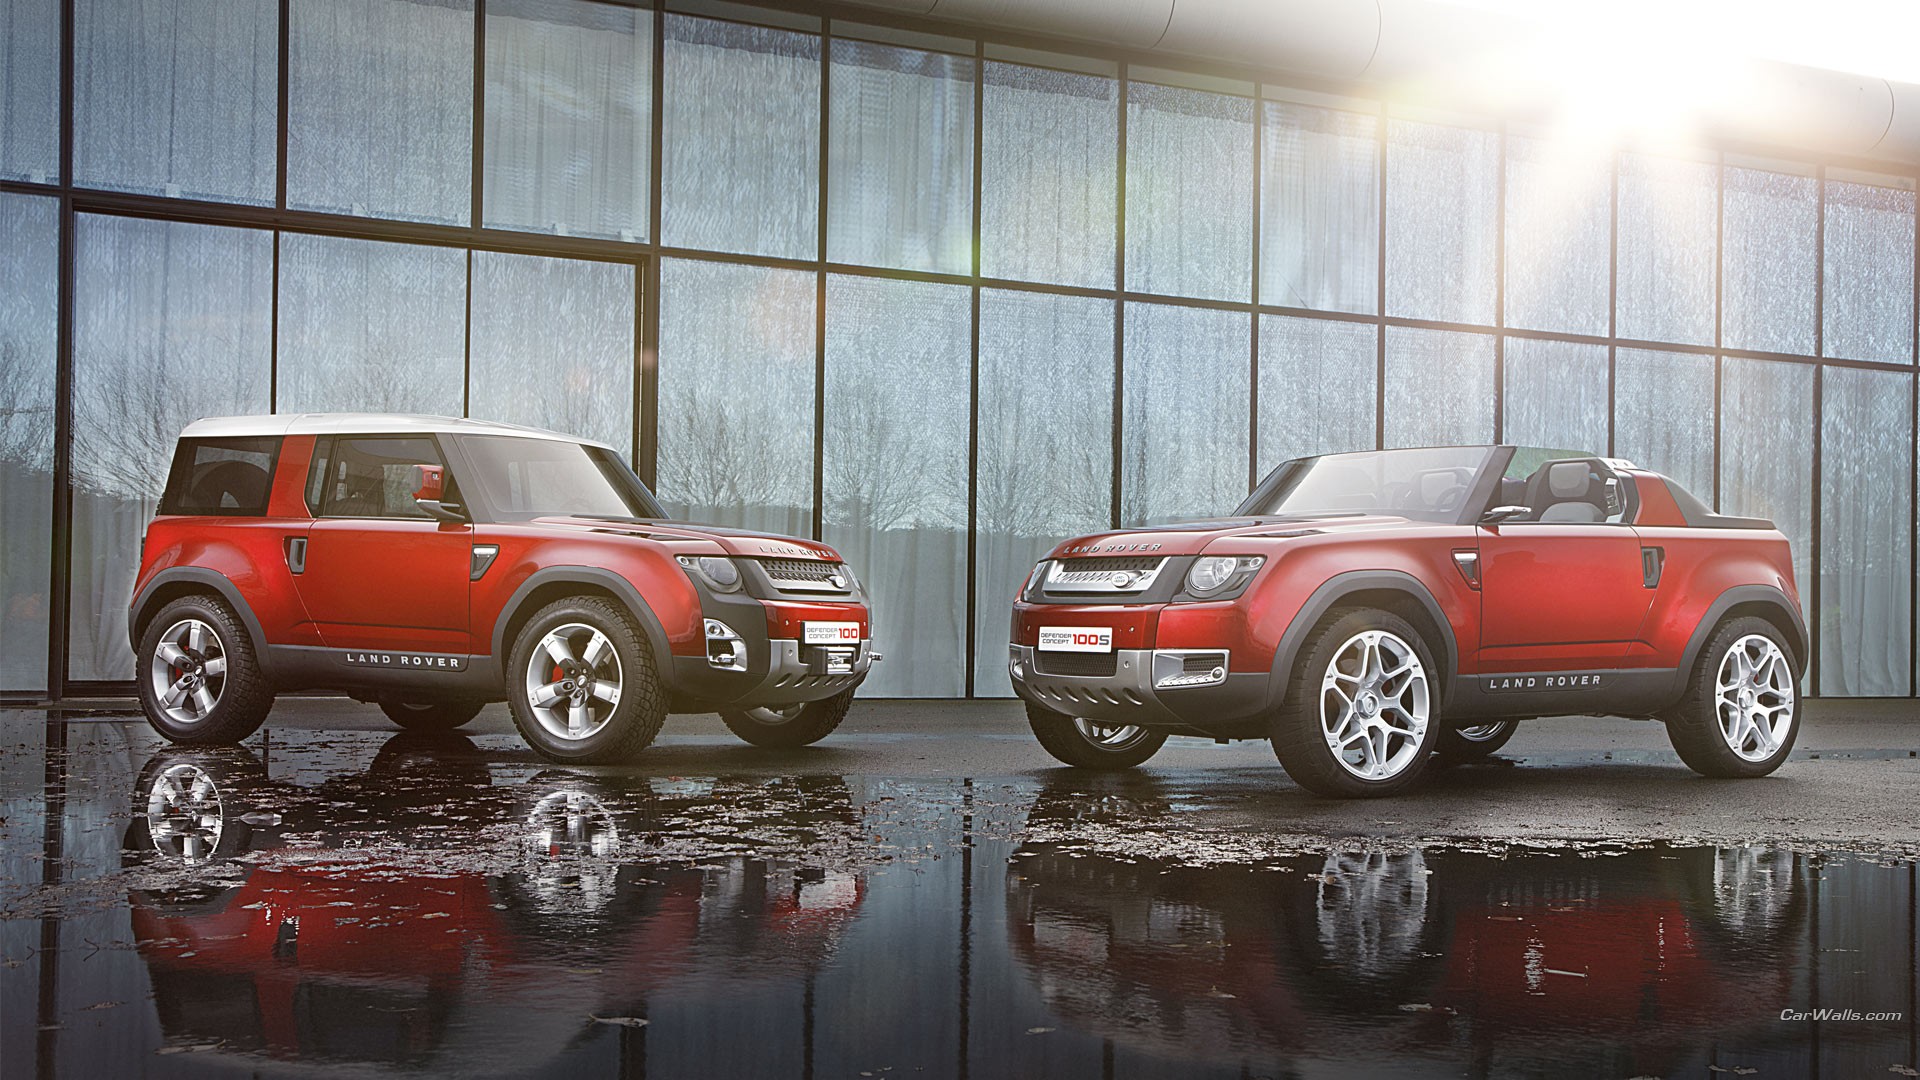 General 1920x1080 Land Rover DC100 concept cars red cars Land Rover car vehicle reflection SUV British cars